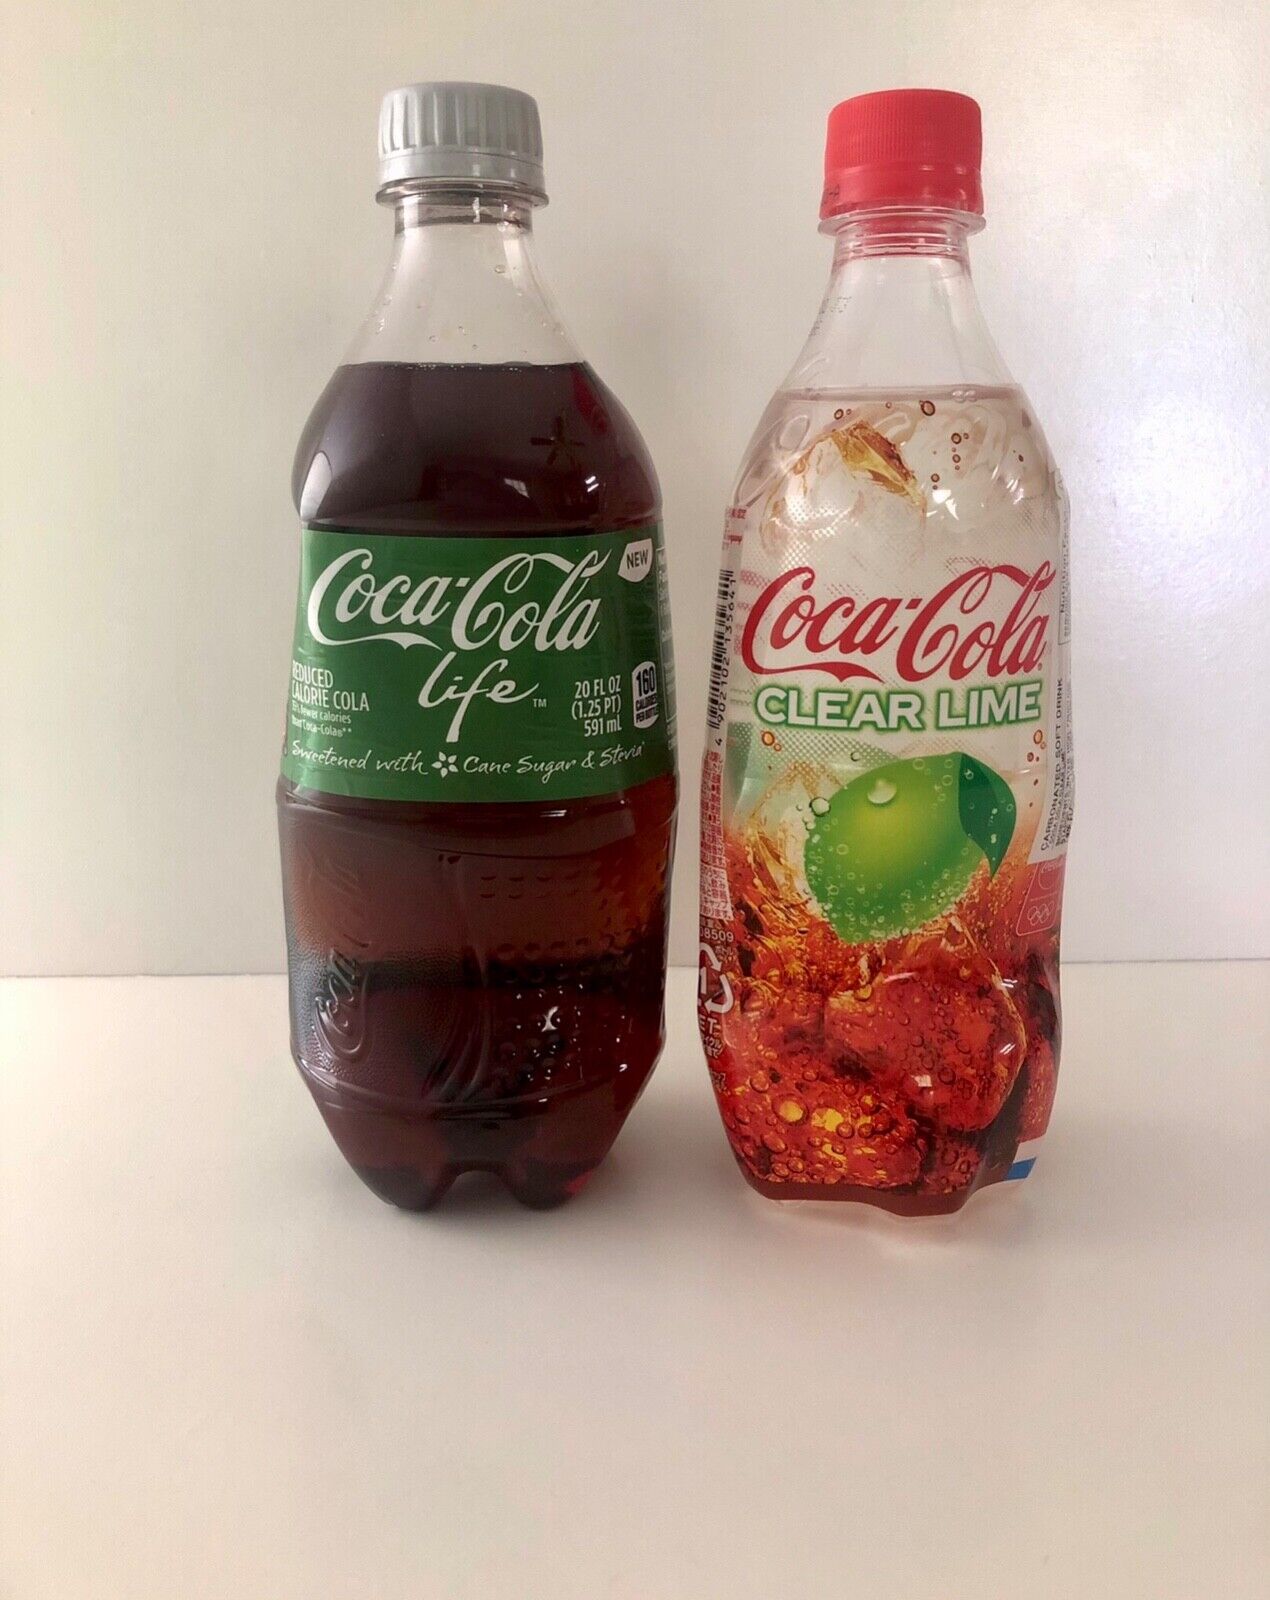 Coca Cola Life ‘New Tag’ & Coca Cola Clear Lime Bottles | Coke Lot of 2, Expired